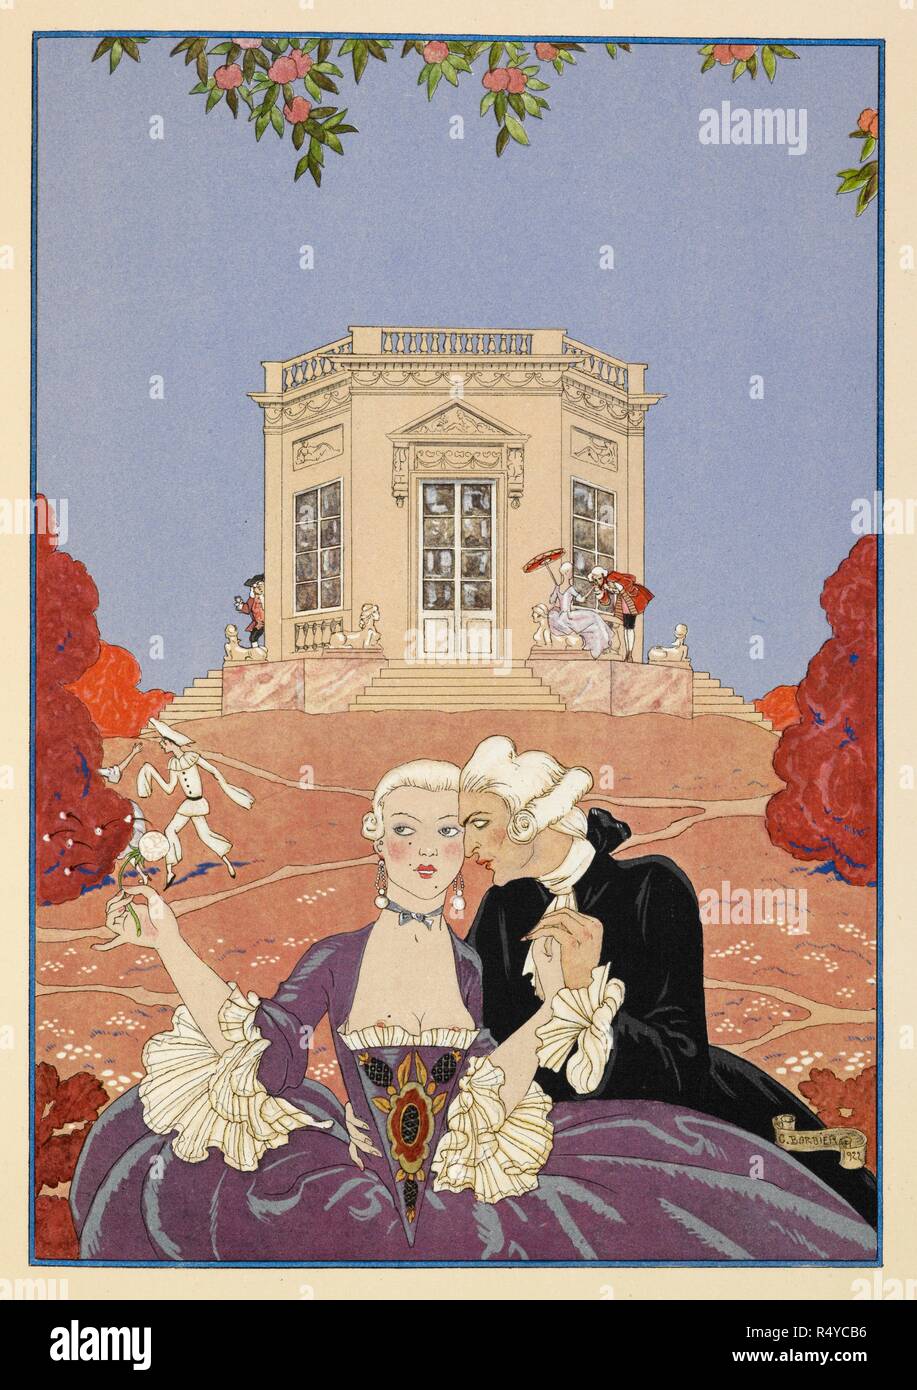 Les Indolents. . FÃªtes galantes. [PoÃ¨mes]. Illustrations de George Barbier. Paris: H. Piazza, 1928. FÃªtes Galantes is an album consisting of romantic prints of French life among the upper classes of the 19th century. Rich aristocrats of the French court used to play gallant scenes from the commedia dellâ€™ arte that were called Fetes Galantes. The prints accompany Paul Verlaine's poetry. Each album contains 20 lithograph prints with pochoir highlighting by George Barbier. Source: L.45/2847, before page 77. Language: French. Stock Photo